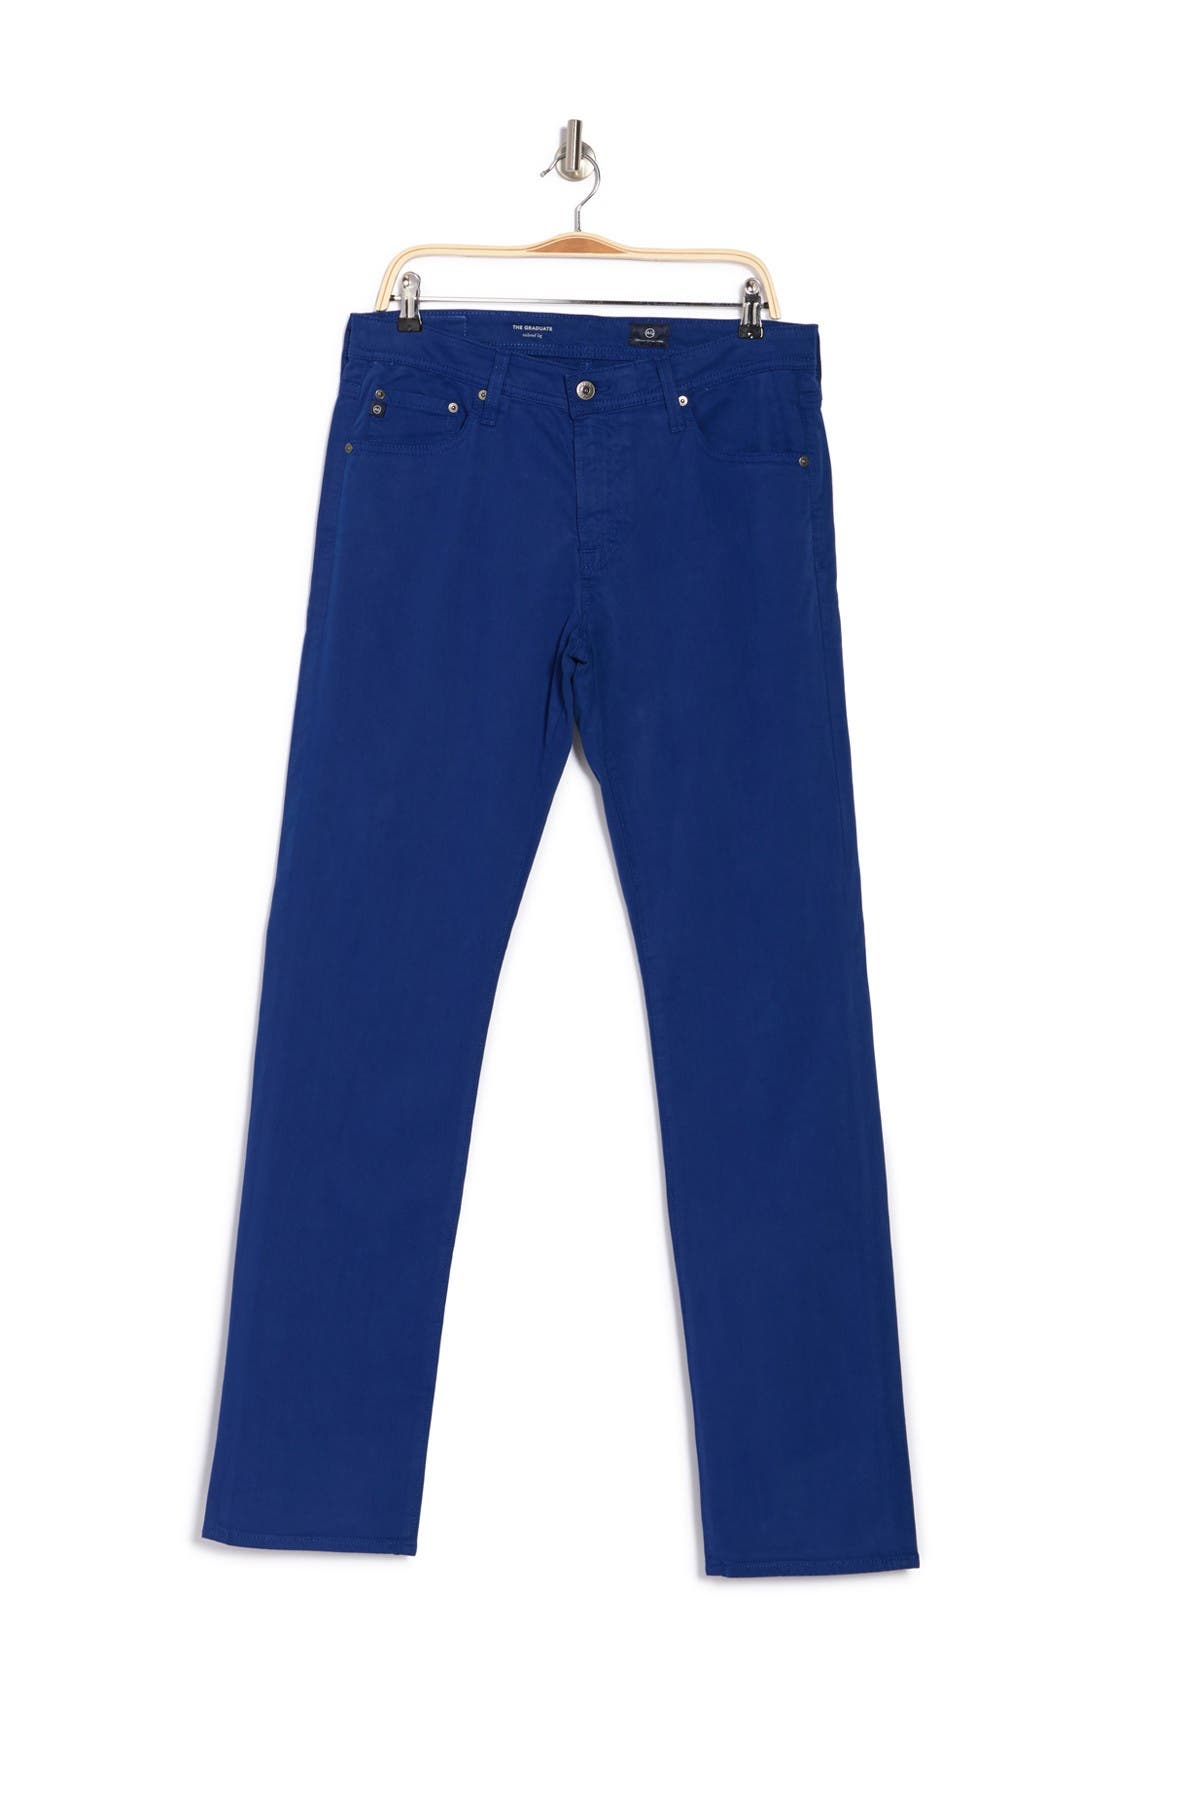 Ag Graduate Tailored Jeans In Open Blue2